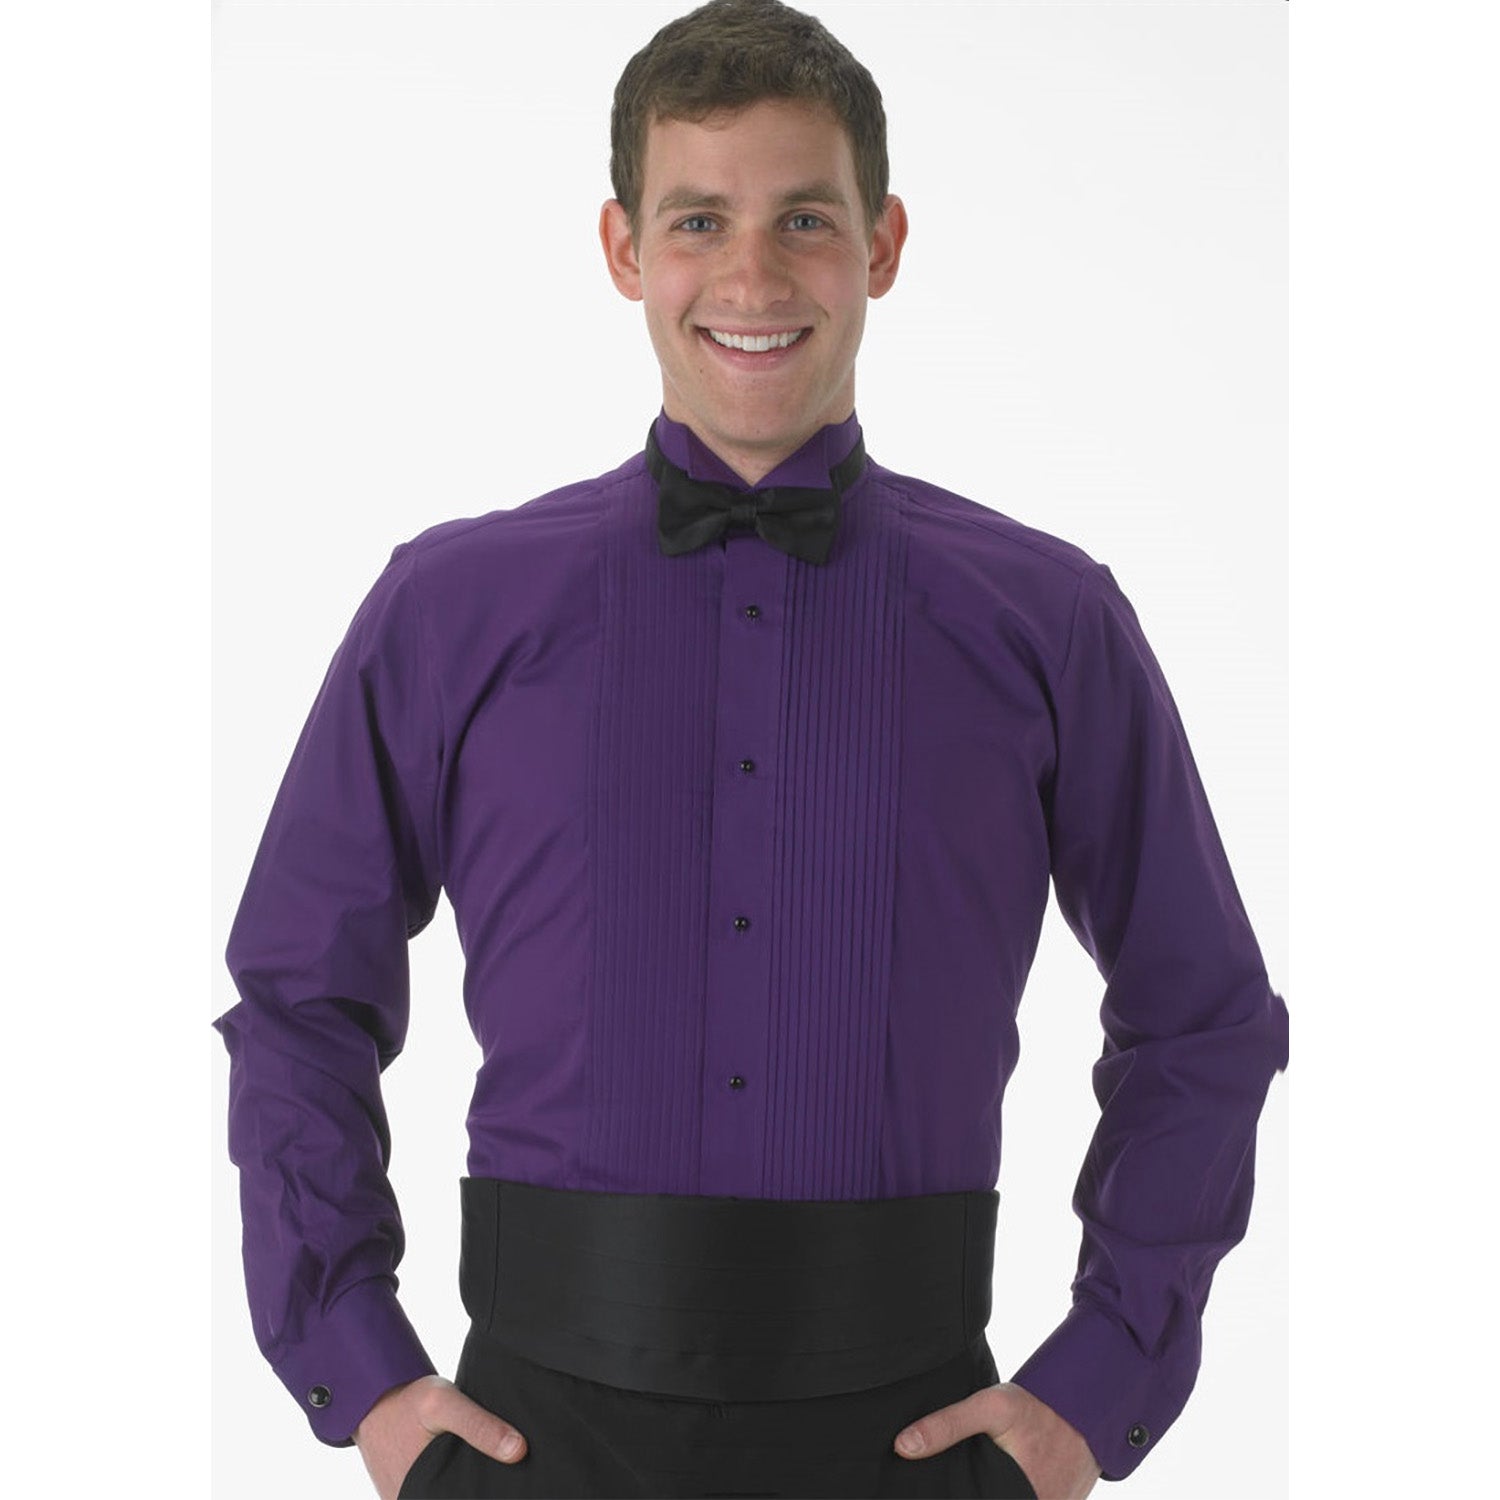 Bring on The Drums Bow Tie. Pre-Tied Cotton Bow Tie Adult